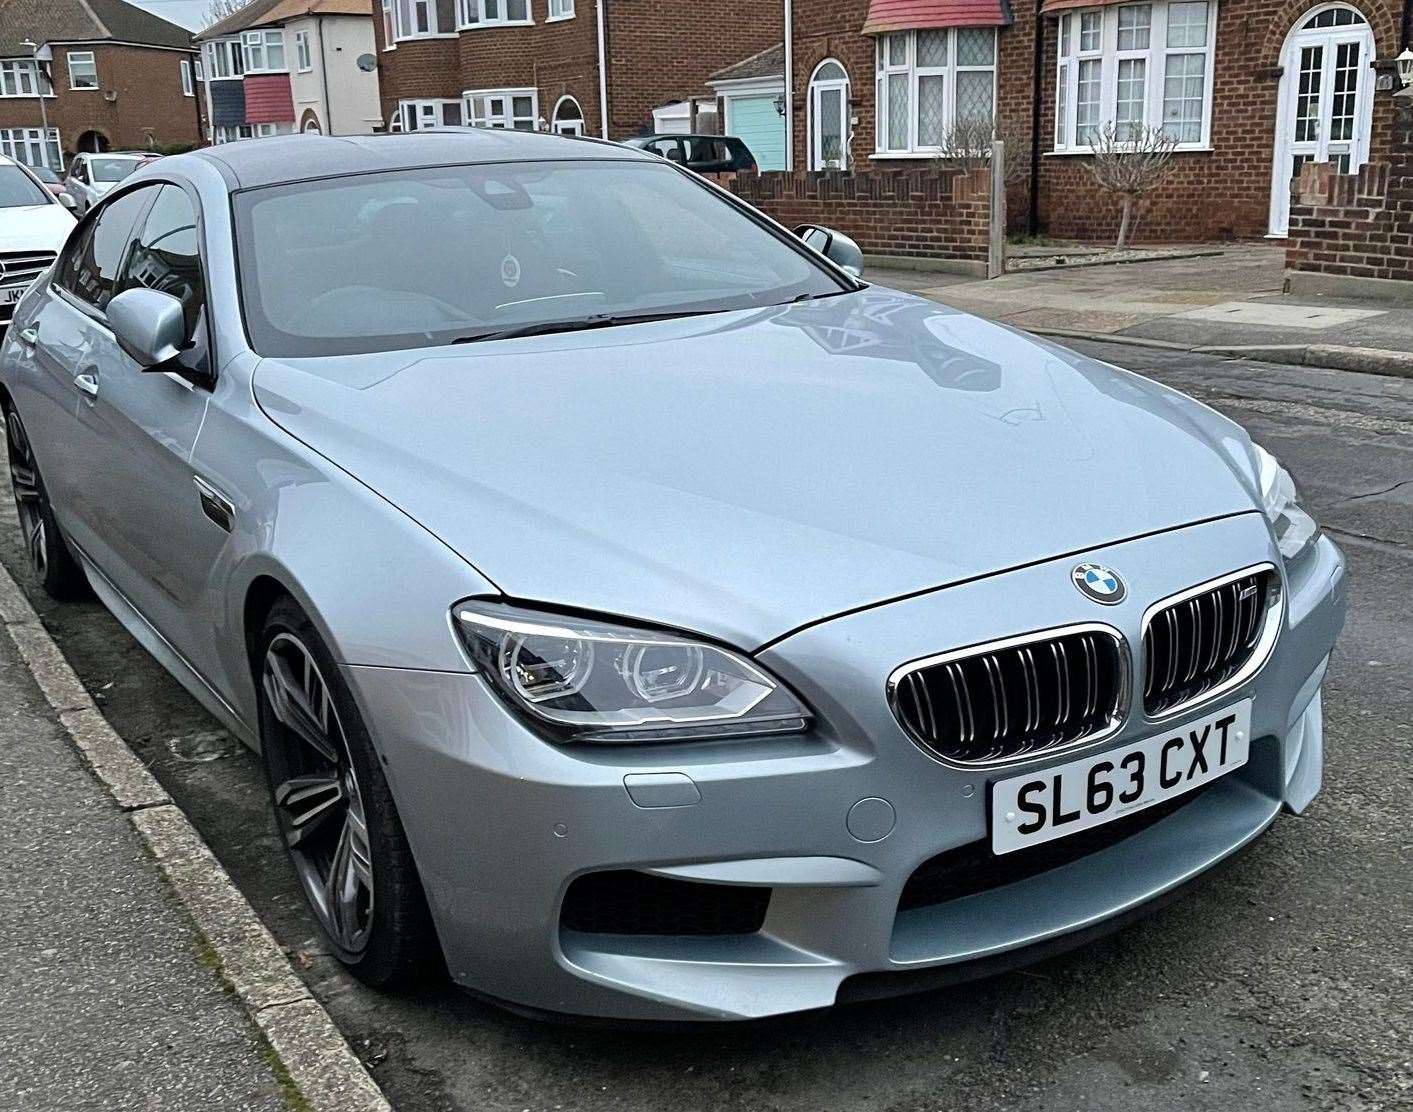 Sheppey resident Frankie Wright's BMW M6 which left the M2 near Rochester